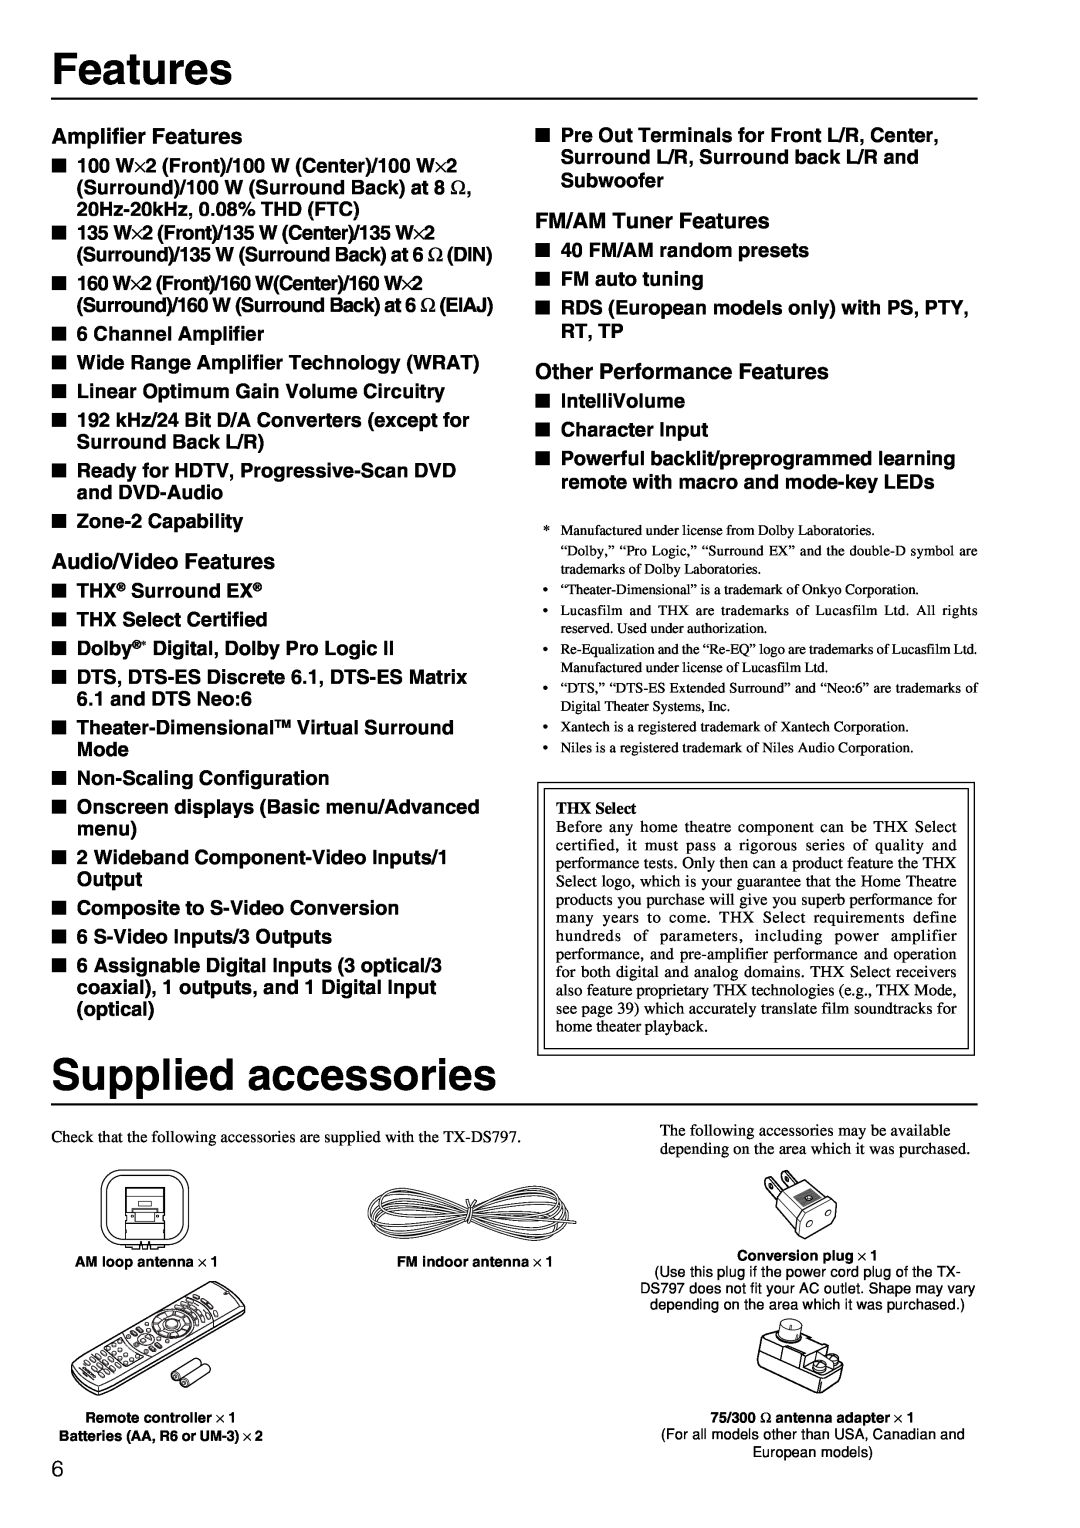 Onkyo TX-DS797 instruction manual Supplied accessories, Amplifier Features, Audio/Video Features, FM/AM Tuner Features 